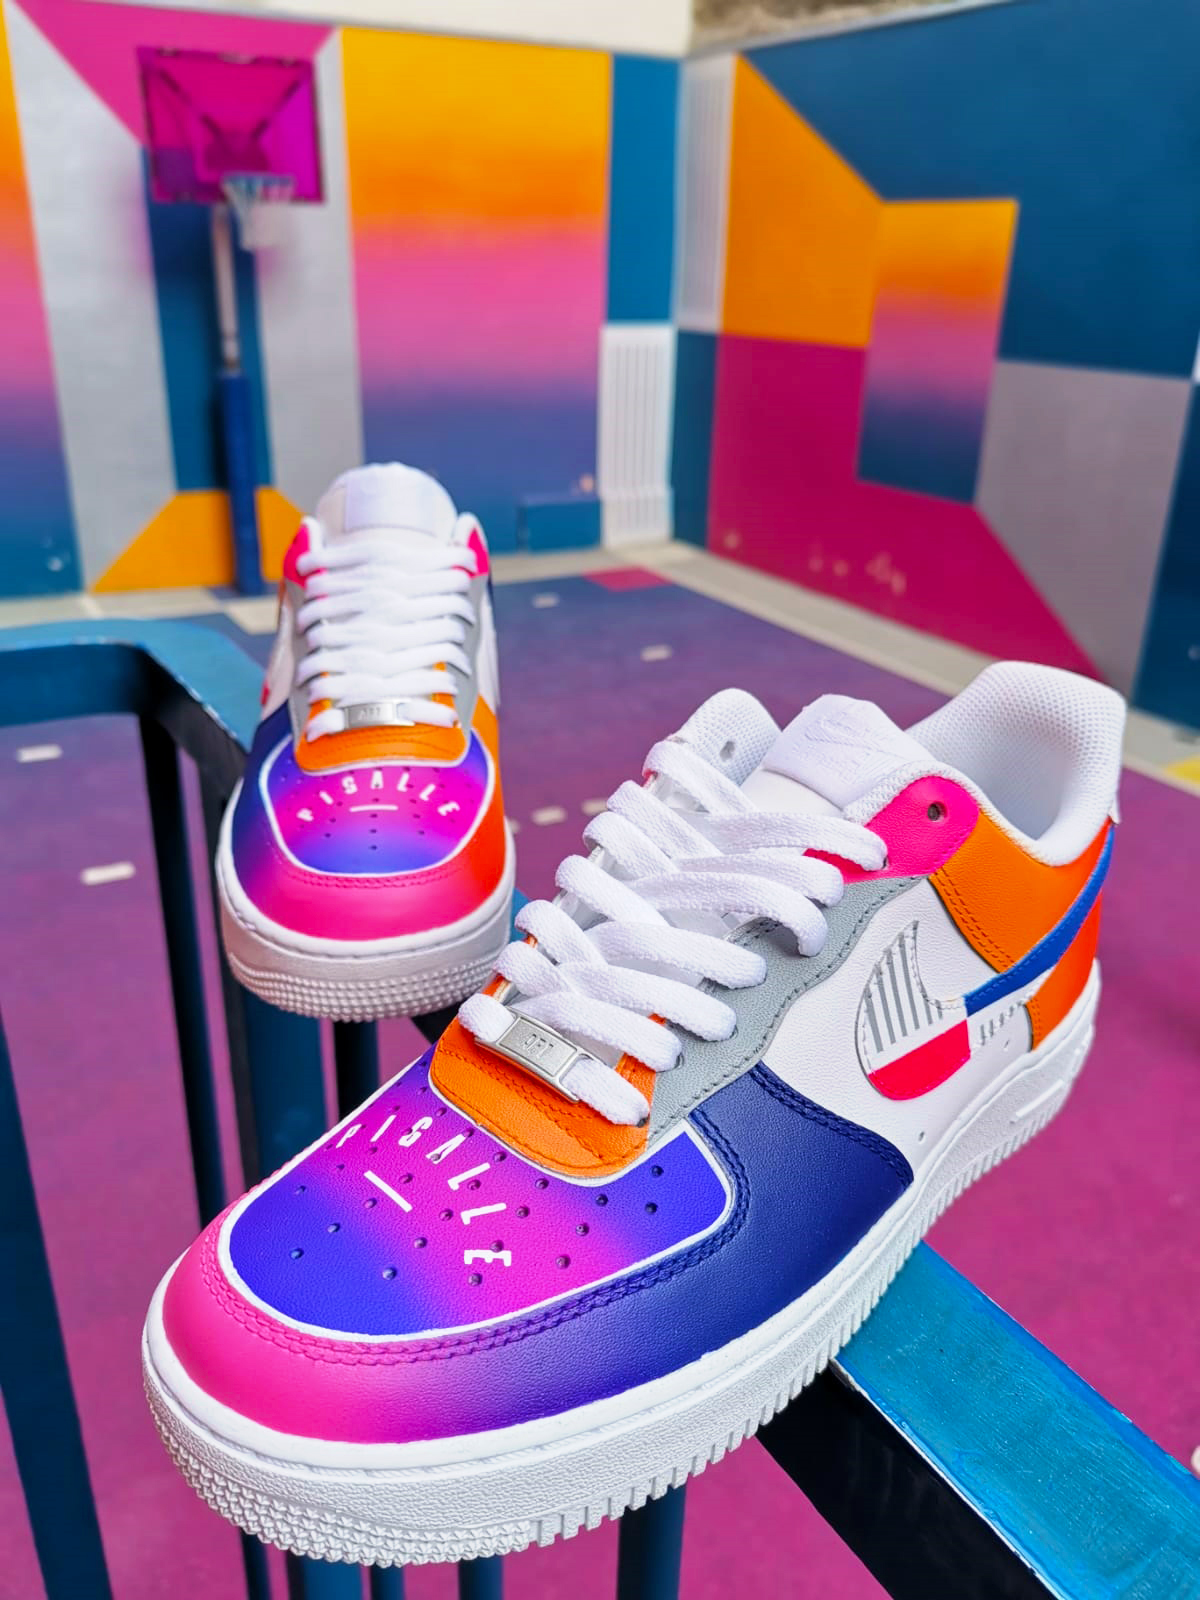 Nike Airforce 1 shoes in neon white, blue, pink and orange.